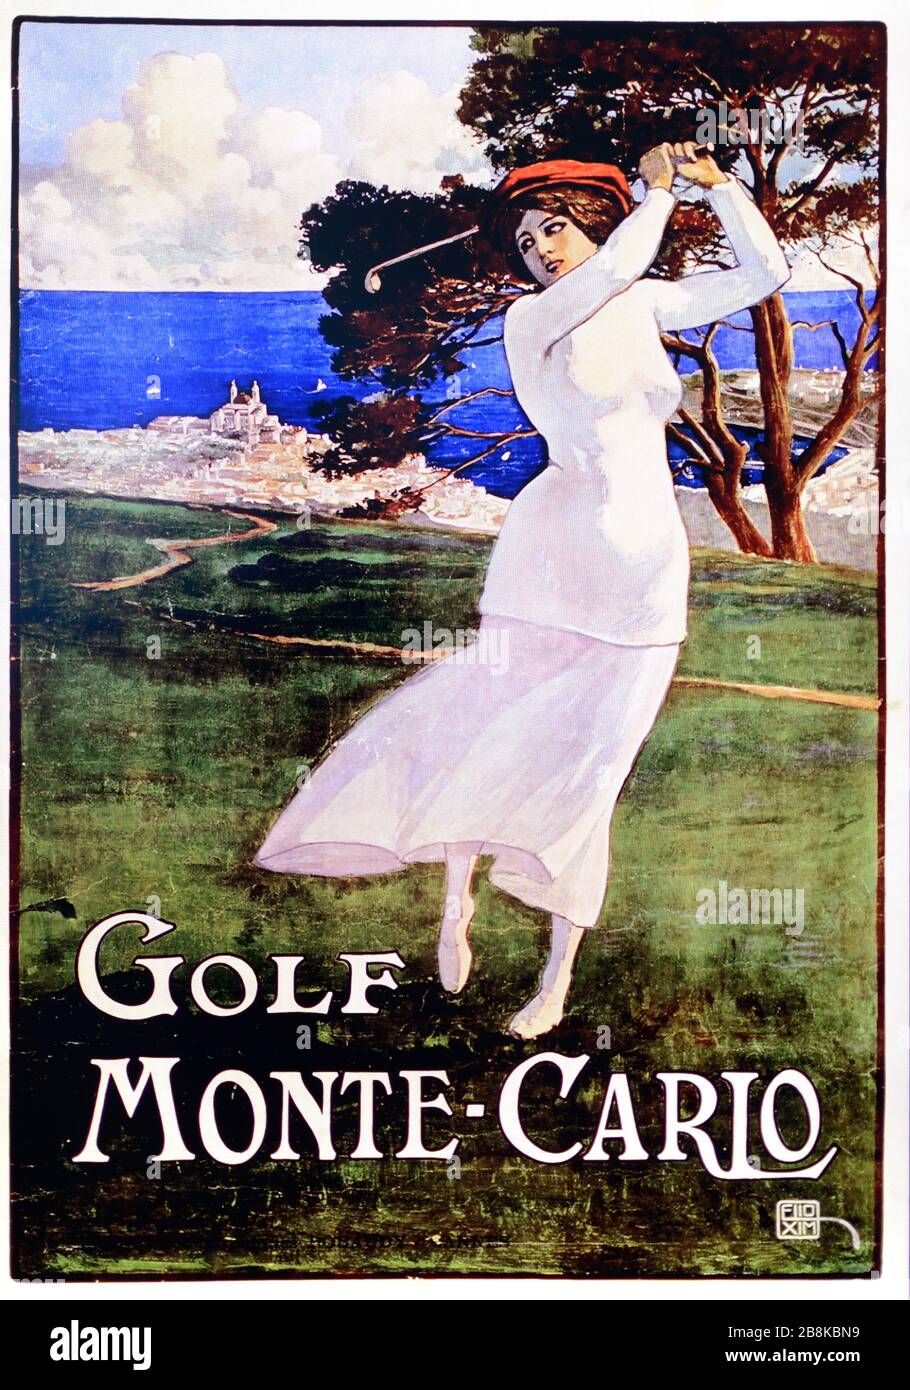 Female Golfer in Vintage Golf Advert Monte Carlo Golf Course Monaco. Vintage Advert, Illustration or Old Poster from 1920s; Stock Photo